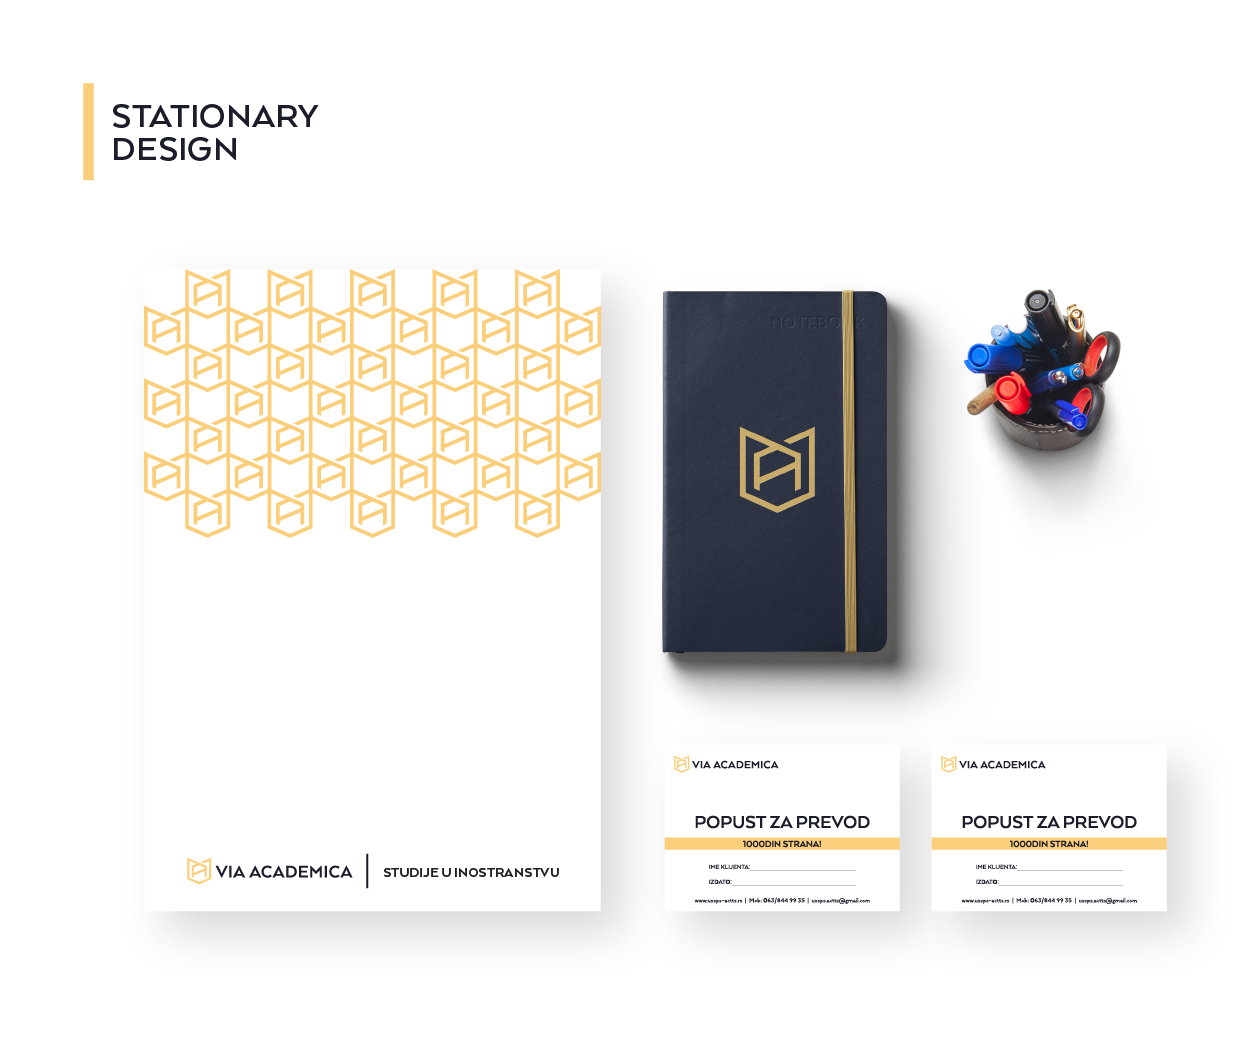 Via Academica - studying abroad and academic career orientation company Stationary Design Image